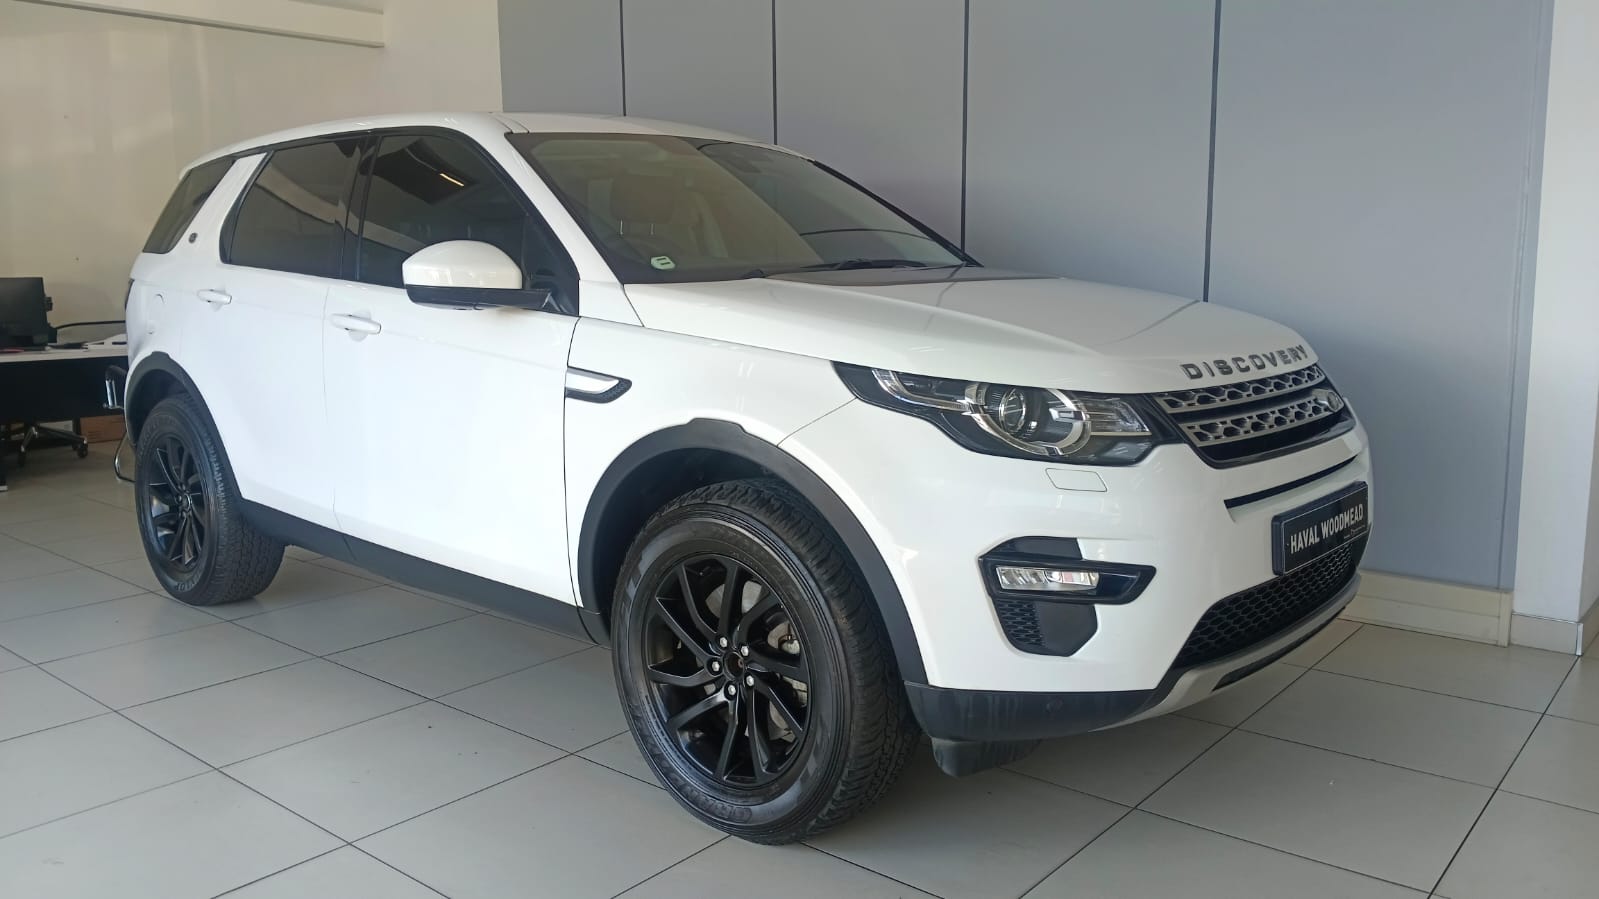 2018 Land Rover Discovery Sport  for sale - UH70750